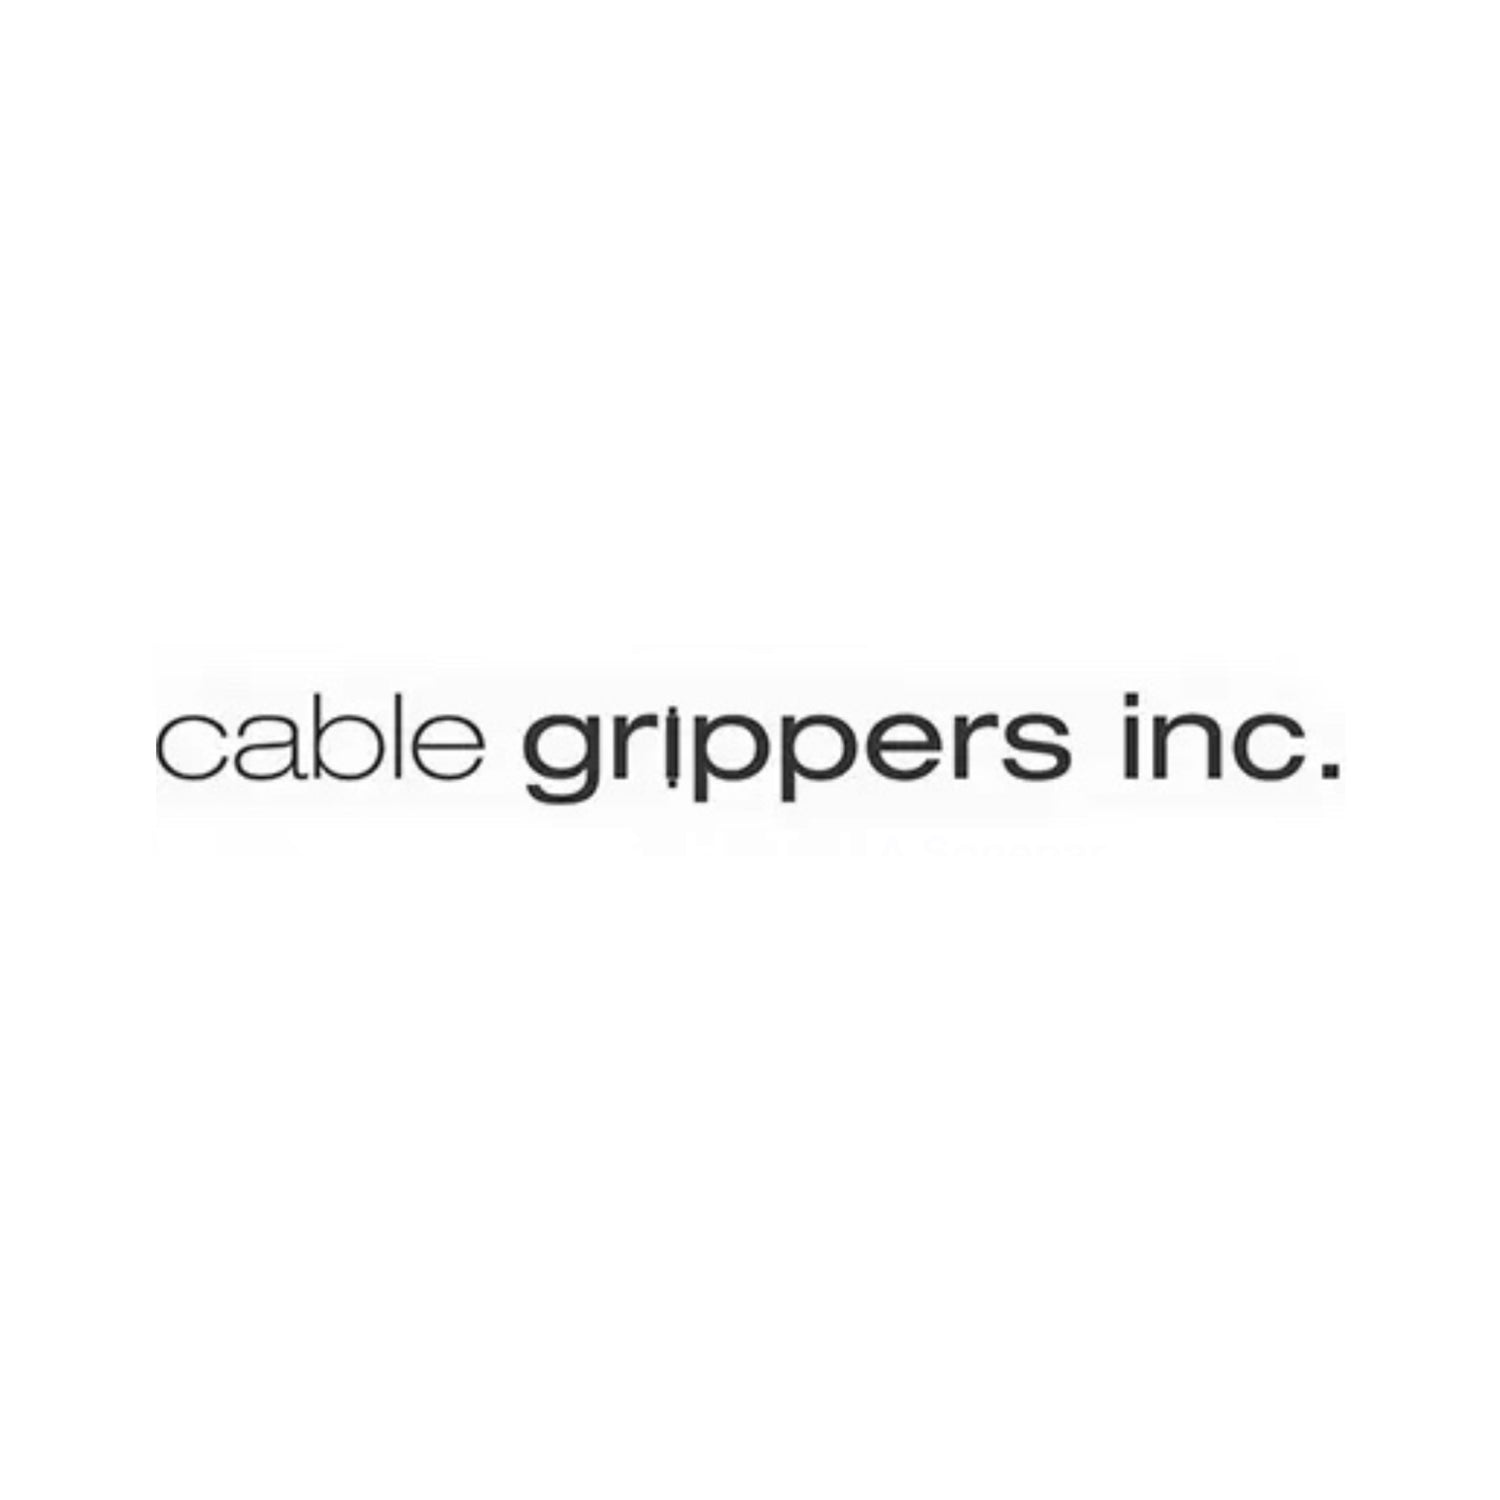 CABLE GRIPPERS INC.